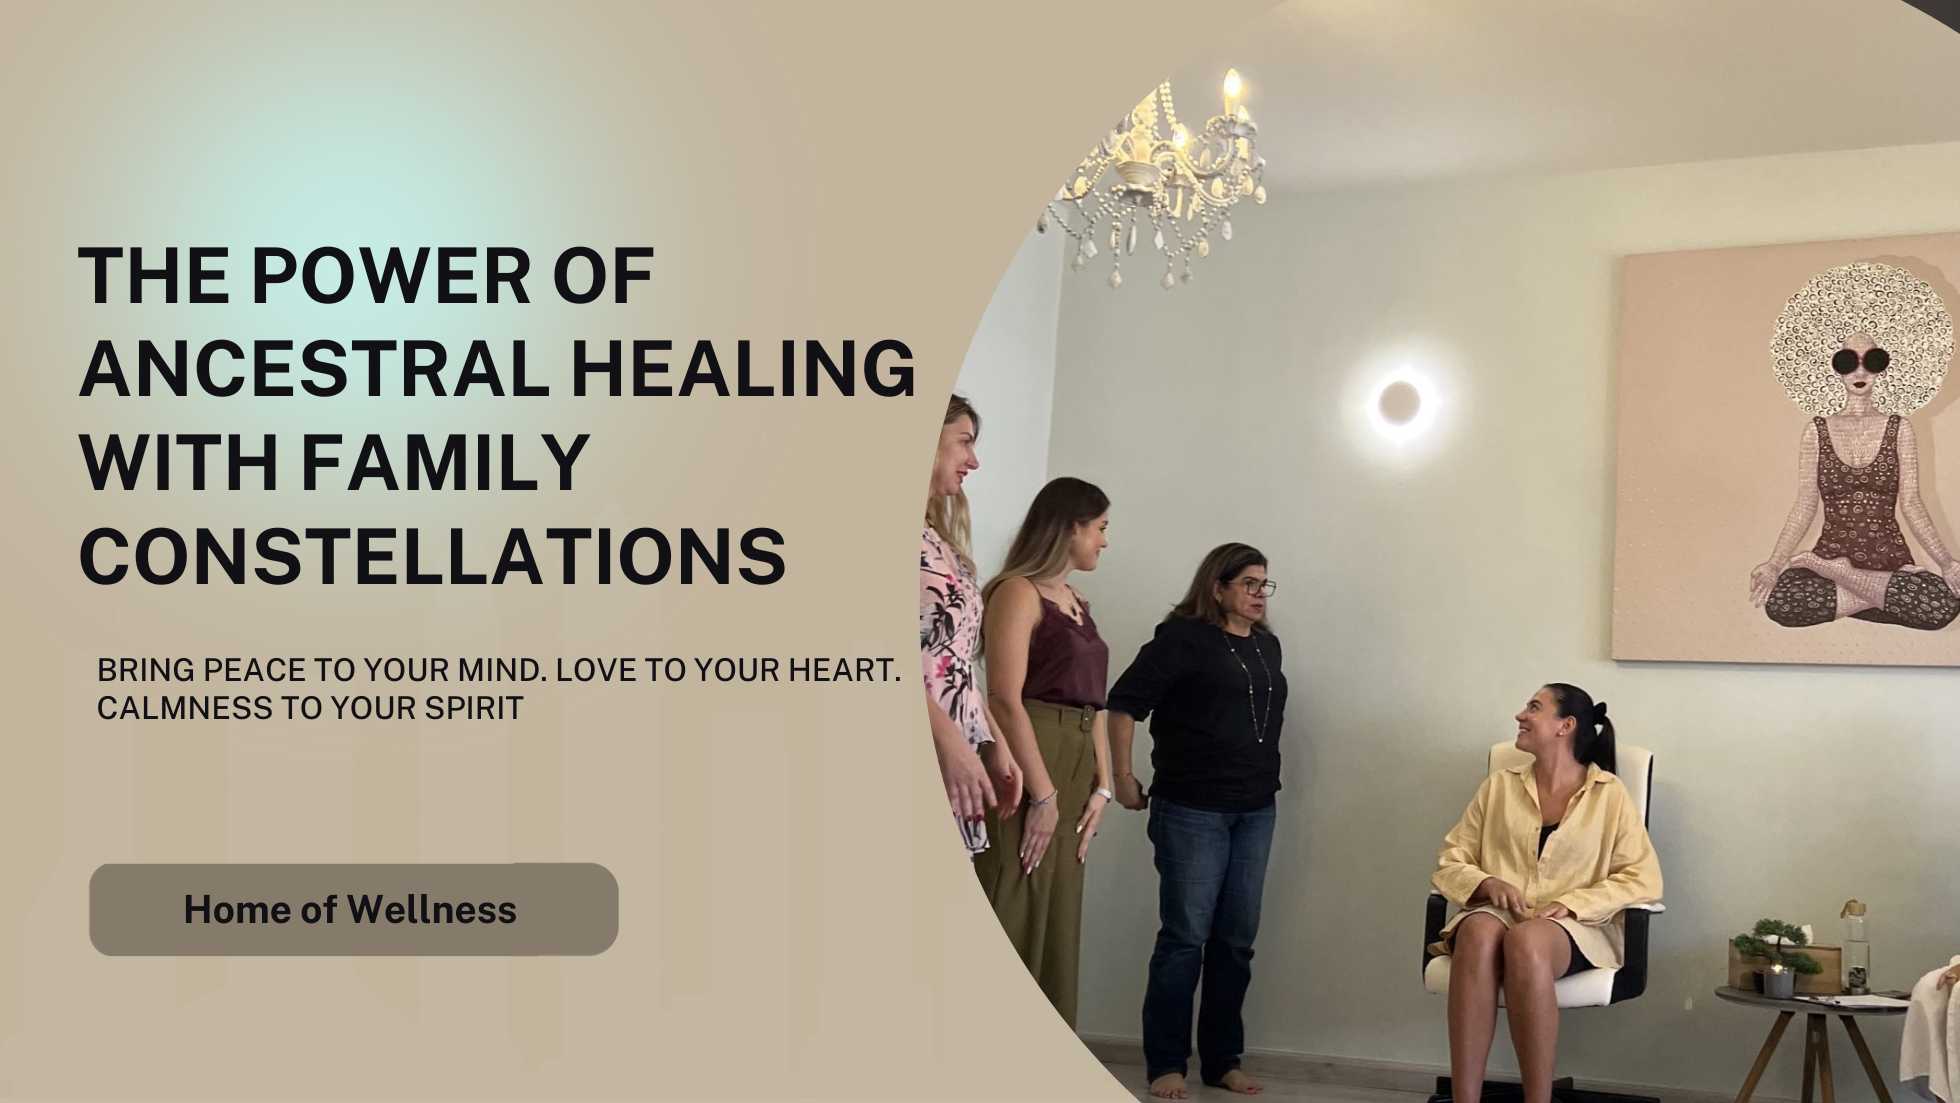 The Power of Ancestral Healing with Family Constellations